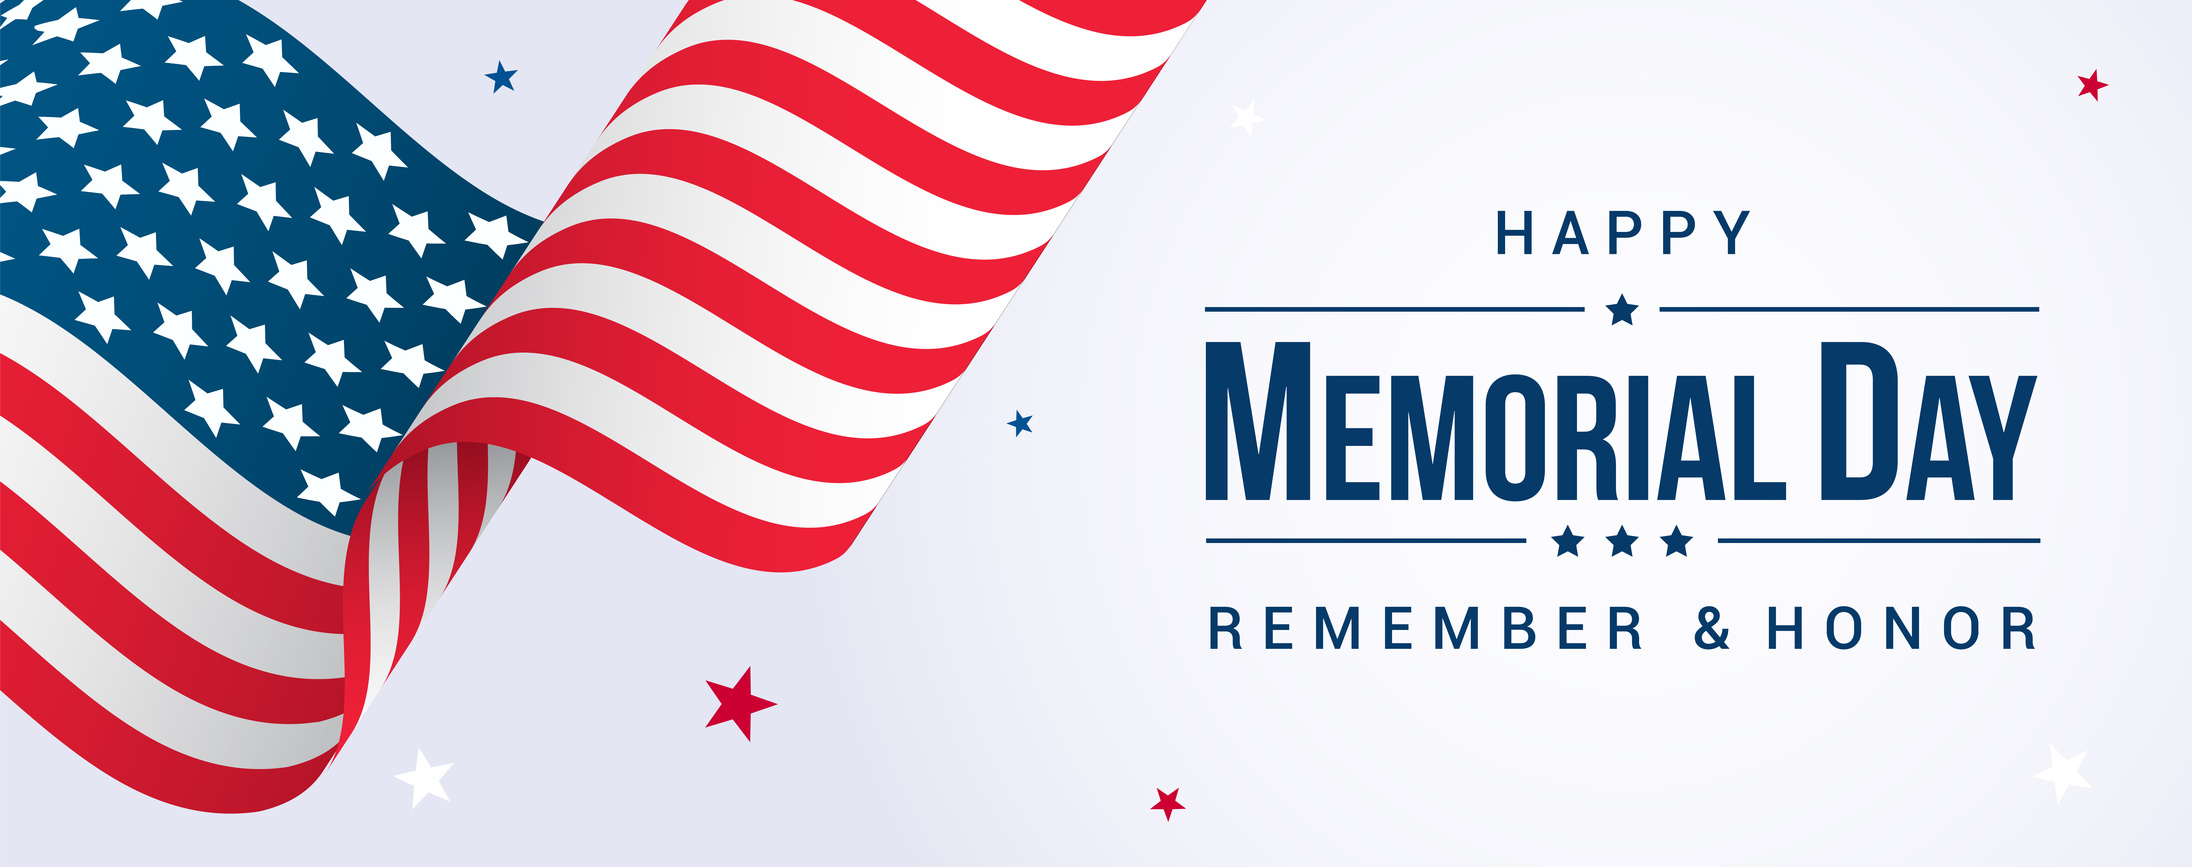 Memorial Day Banner Vector illustration, USA flag waving with stars on